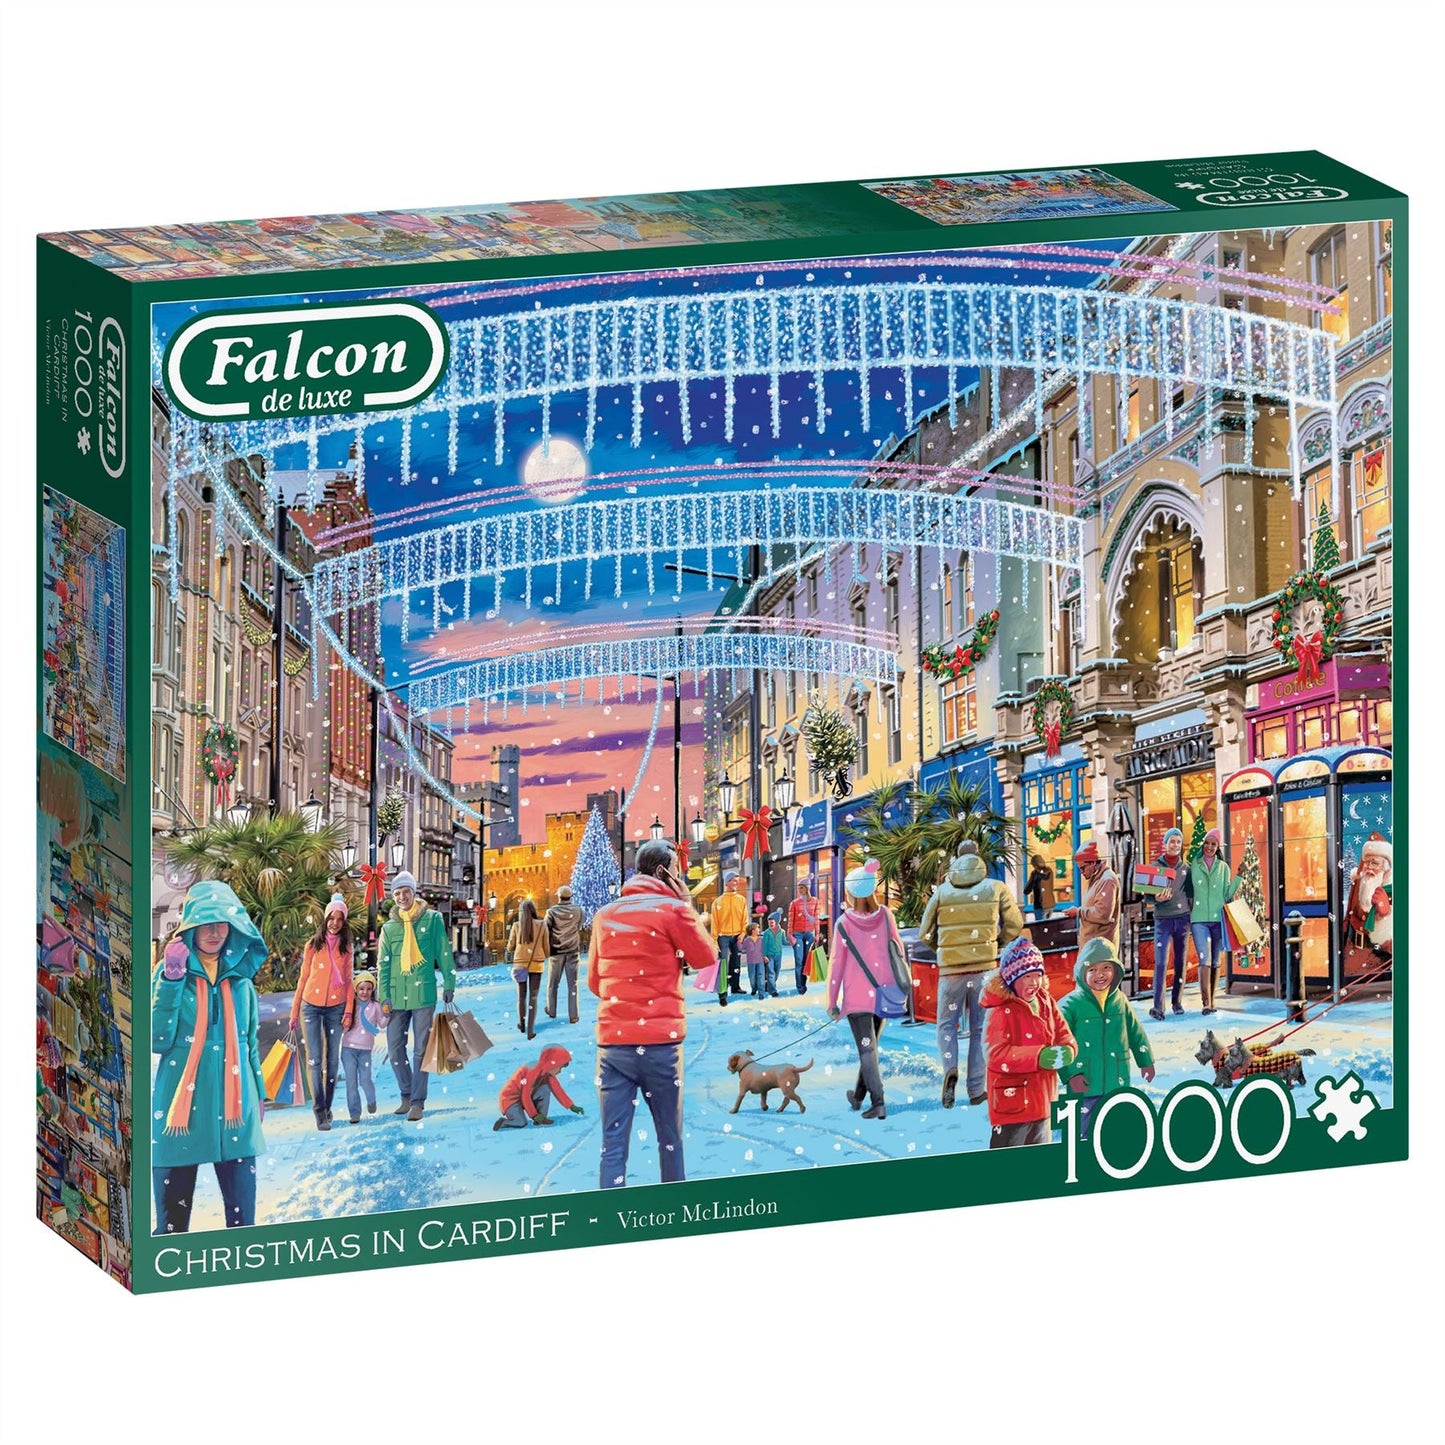 Christmas in Cardiff 1000 Piece jigsaw puzzle box 1